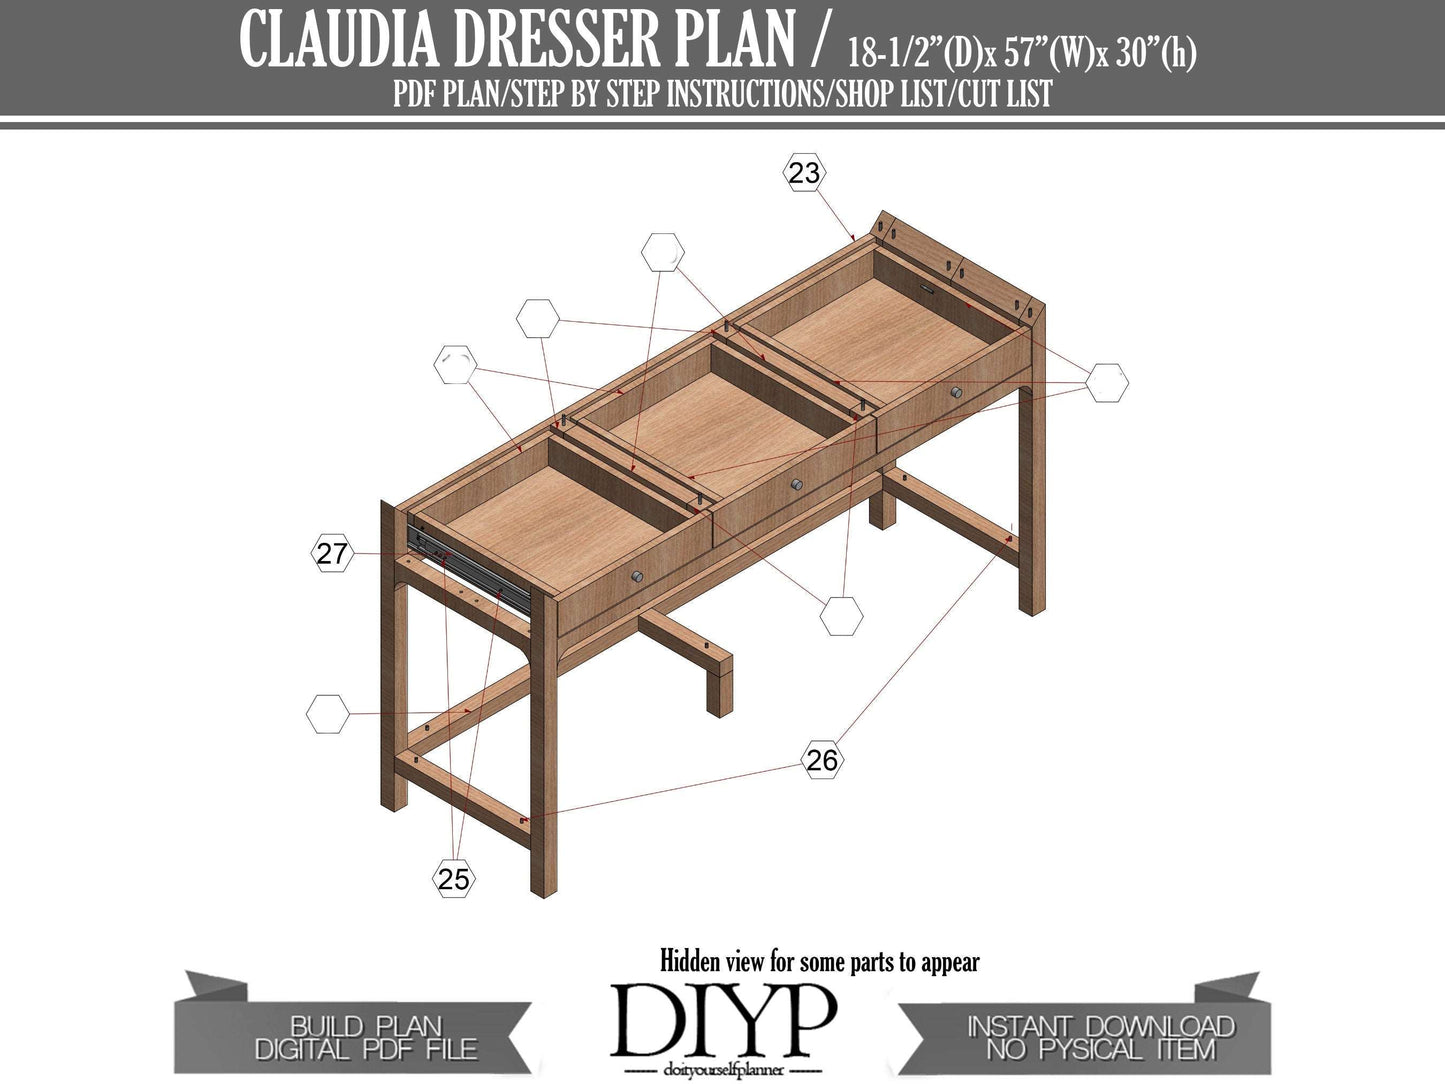 Diy blueprint plans for dresser with drawers , nightstand plans, entryway dresser woodworking plans